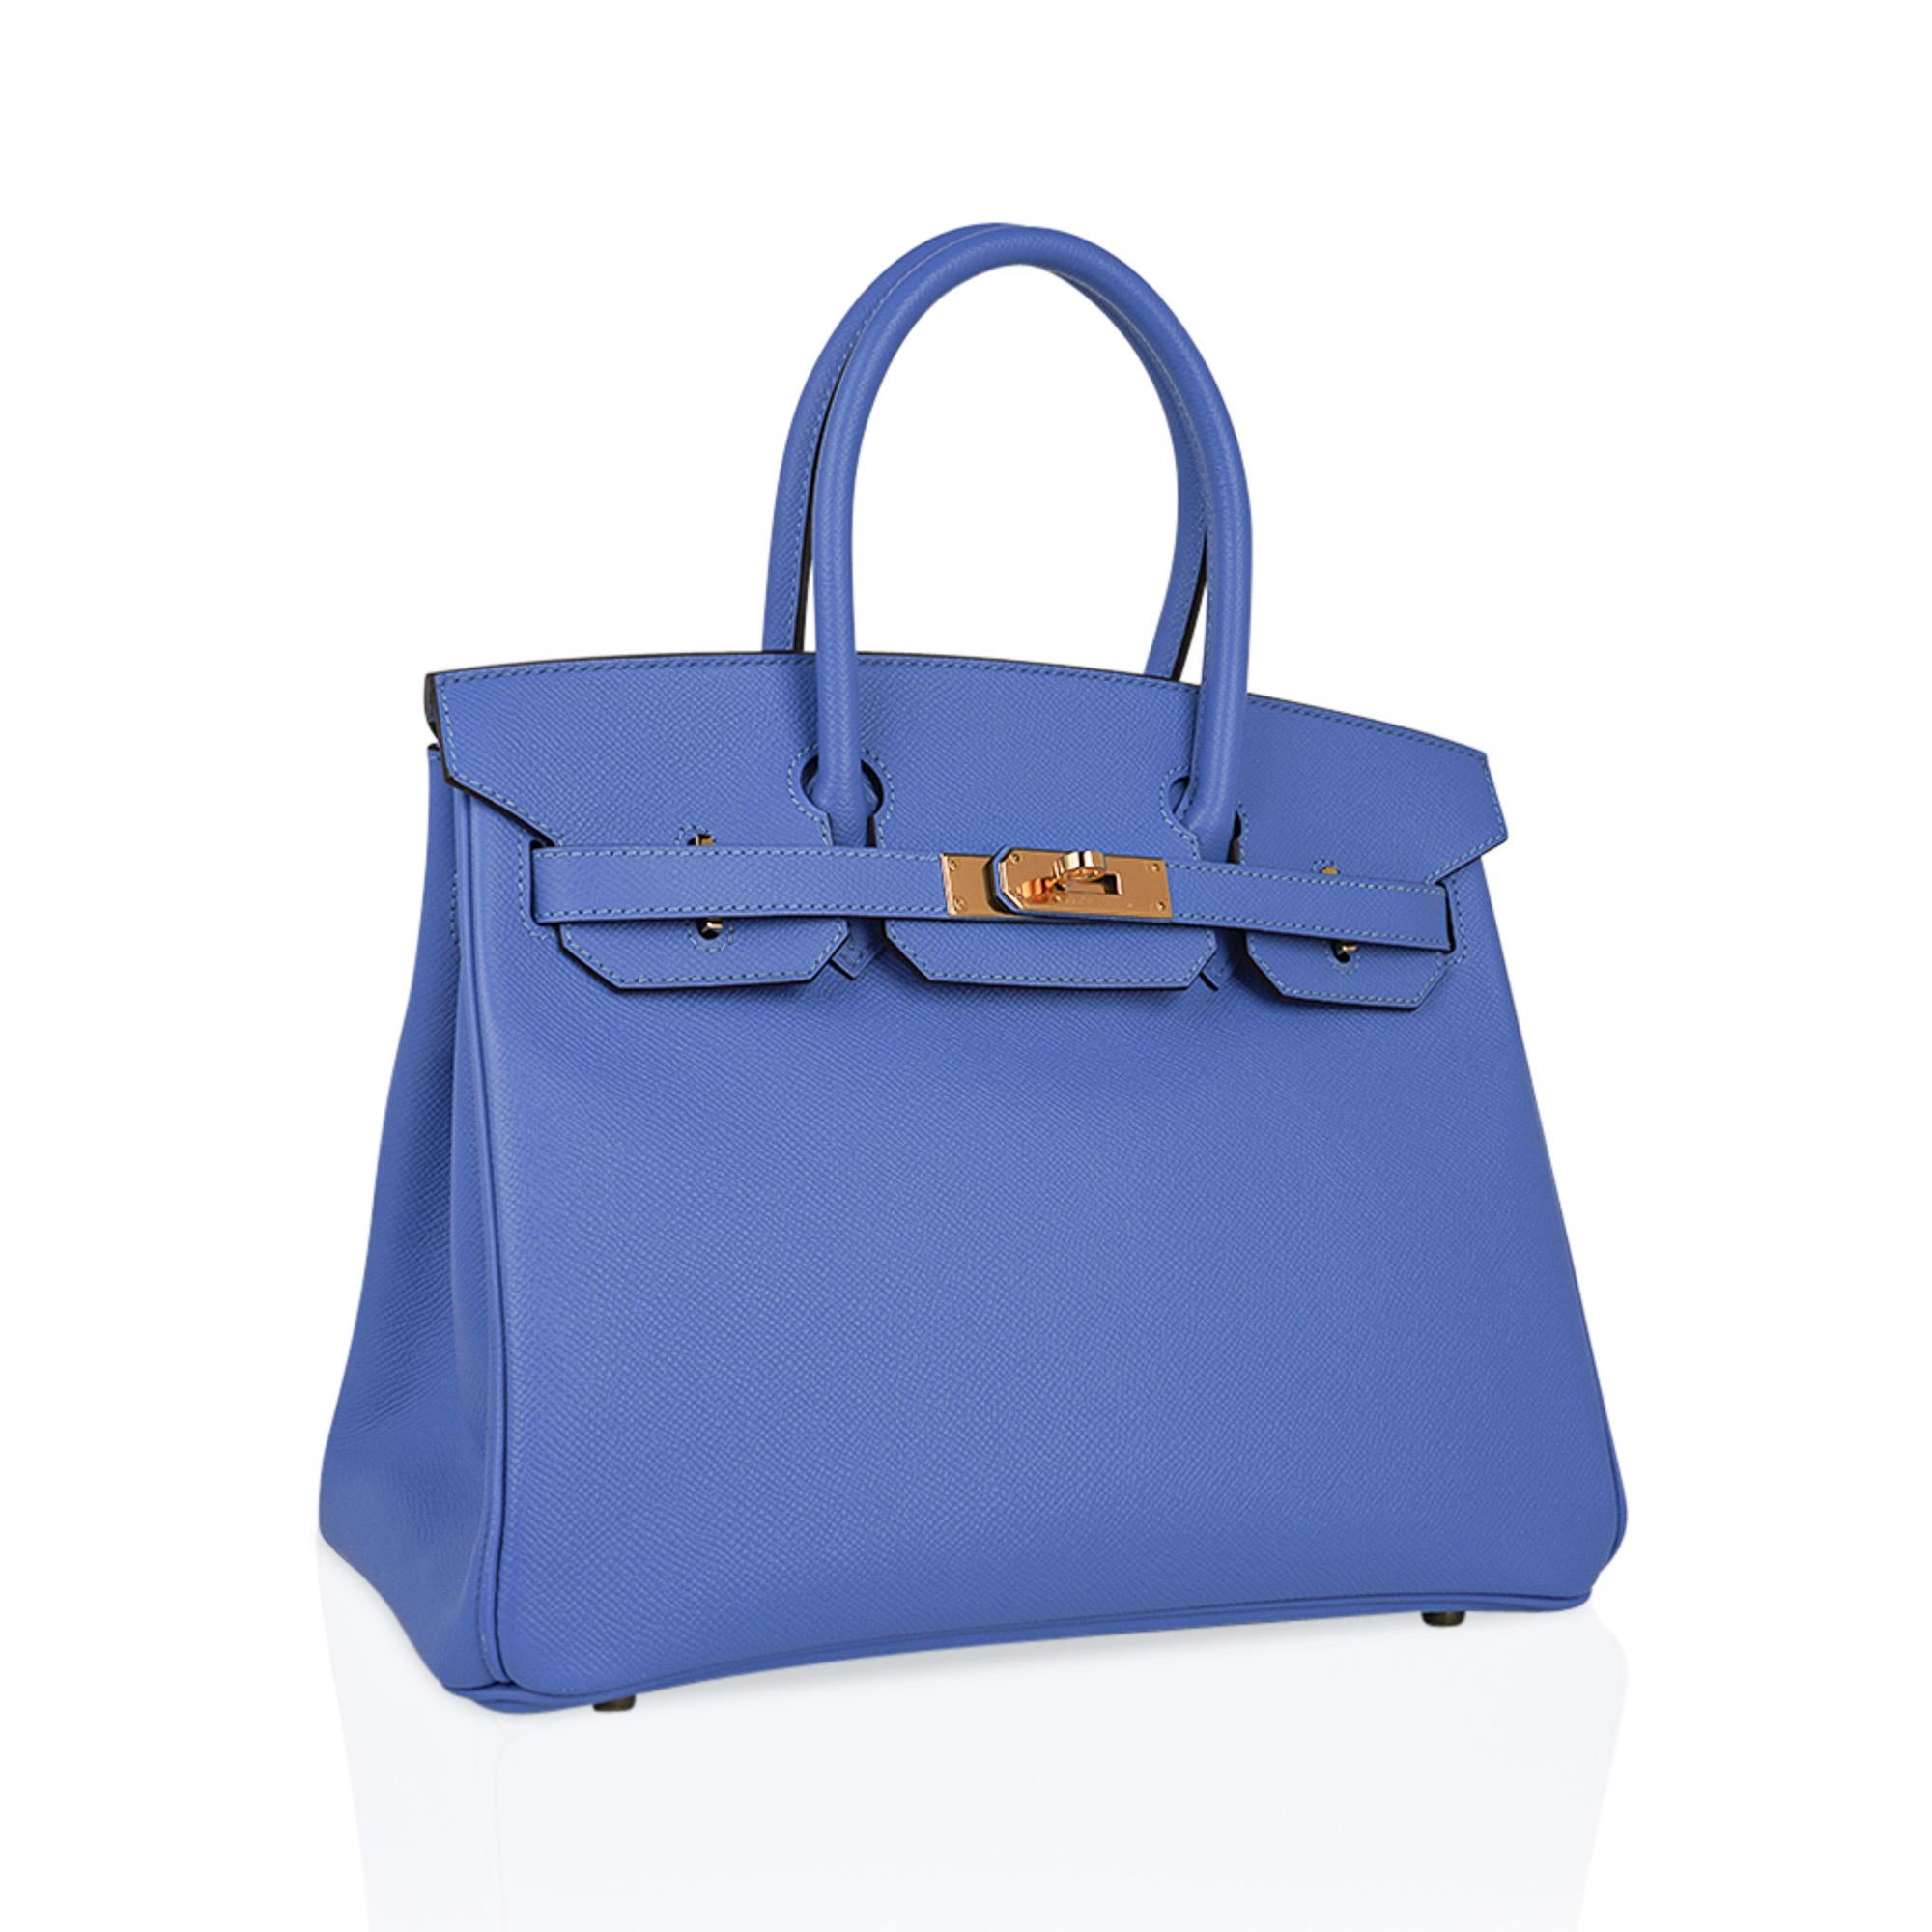 Mightychic offers a rare Hermes Birkin 30 Blue Paradis bag.
Featured in Epsom leather which holds the shape of the bag and is lighter in weight. 
Accentuated with rich gold hardware.
This no longer produced Blue Birkin bag will take you for year